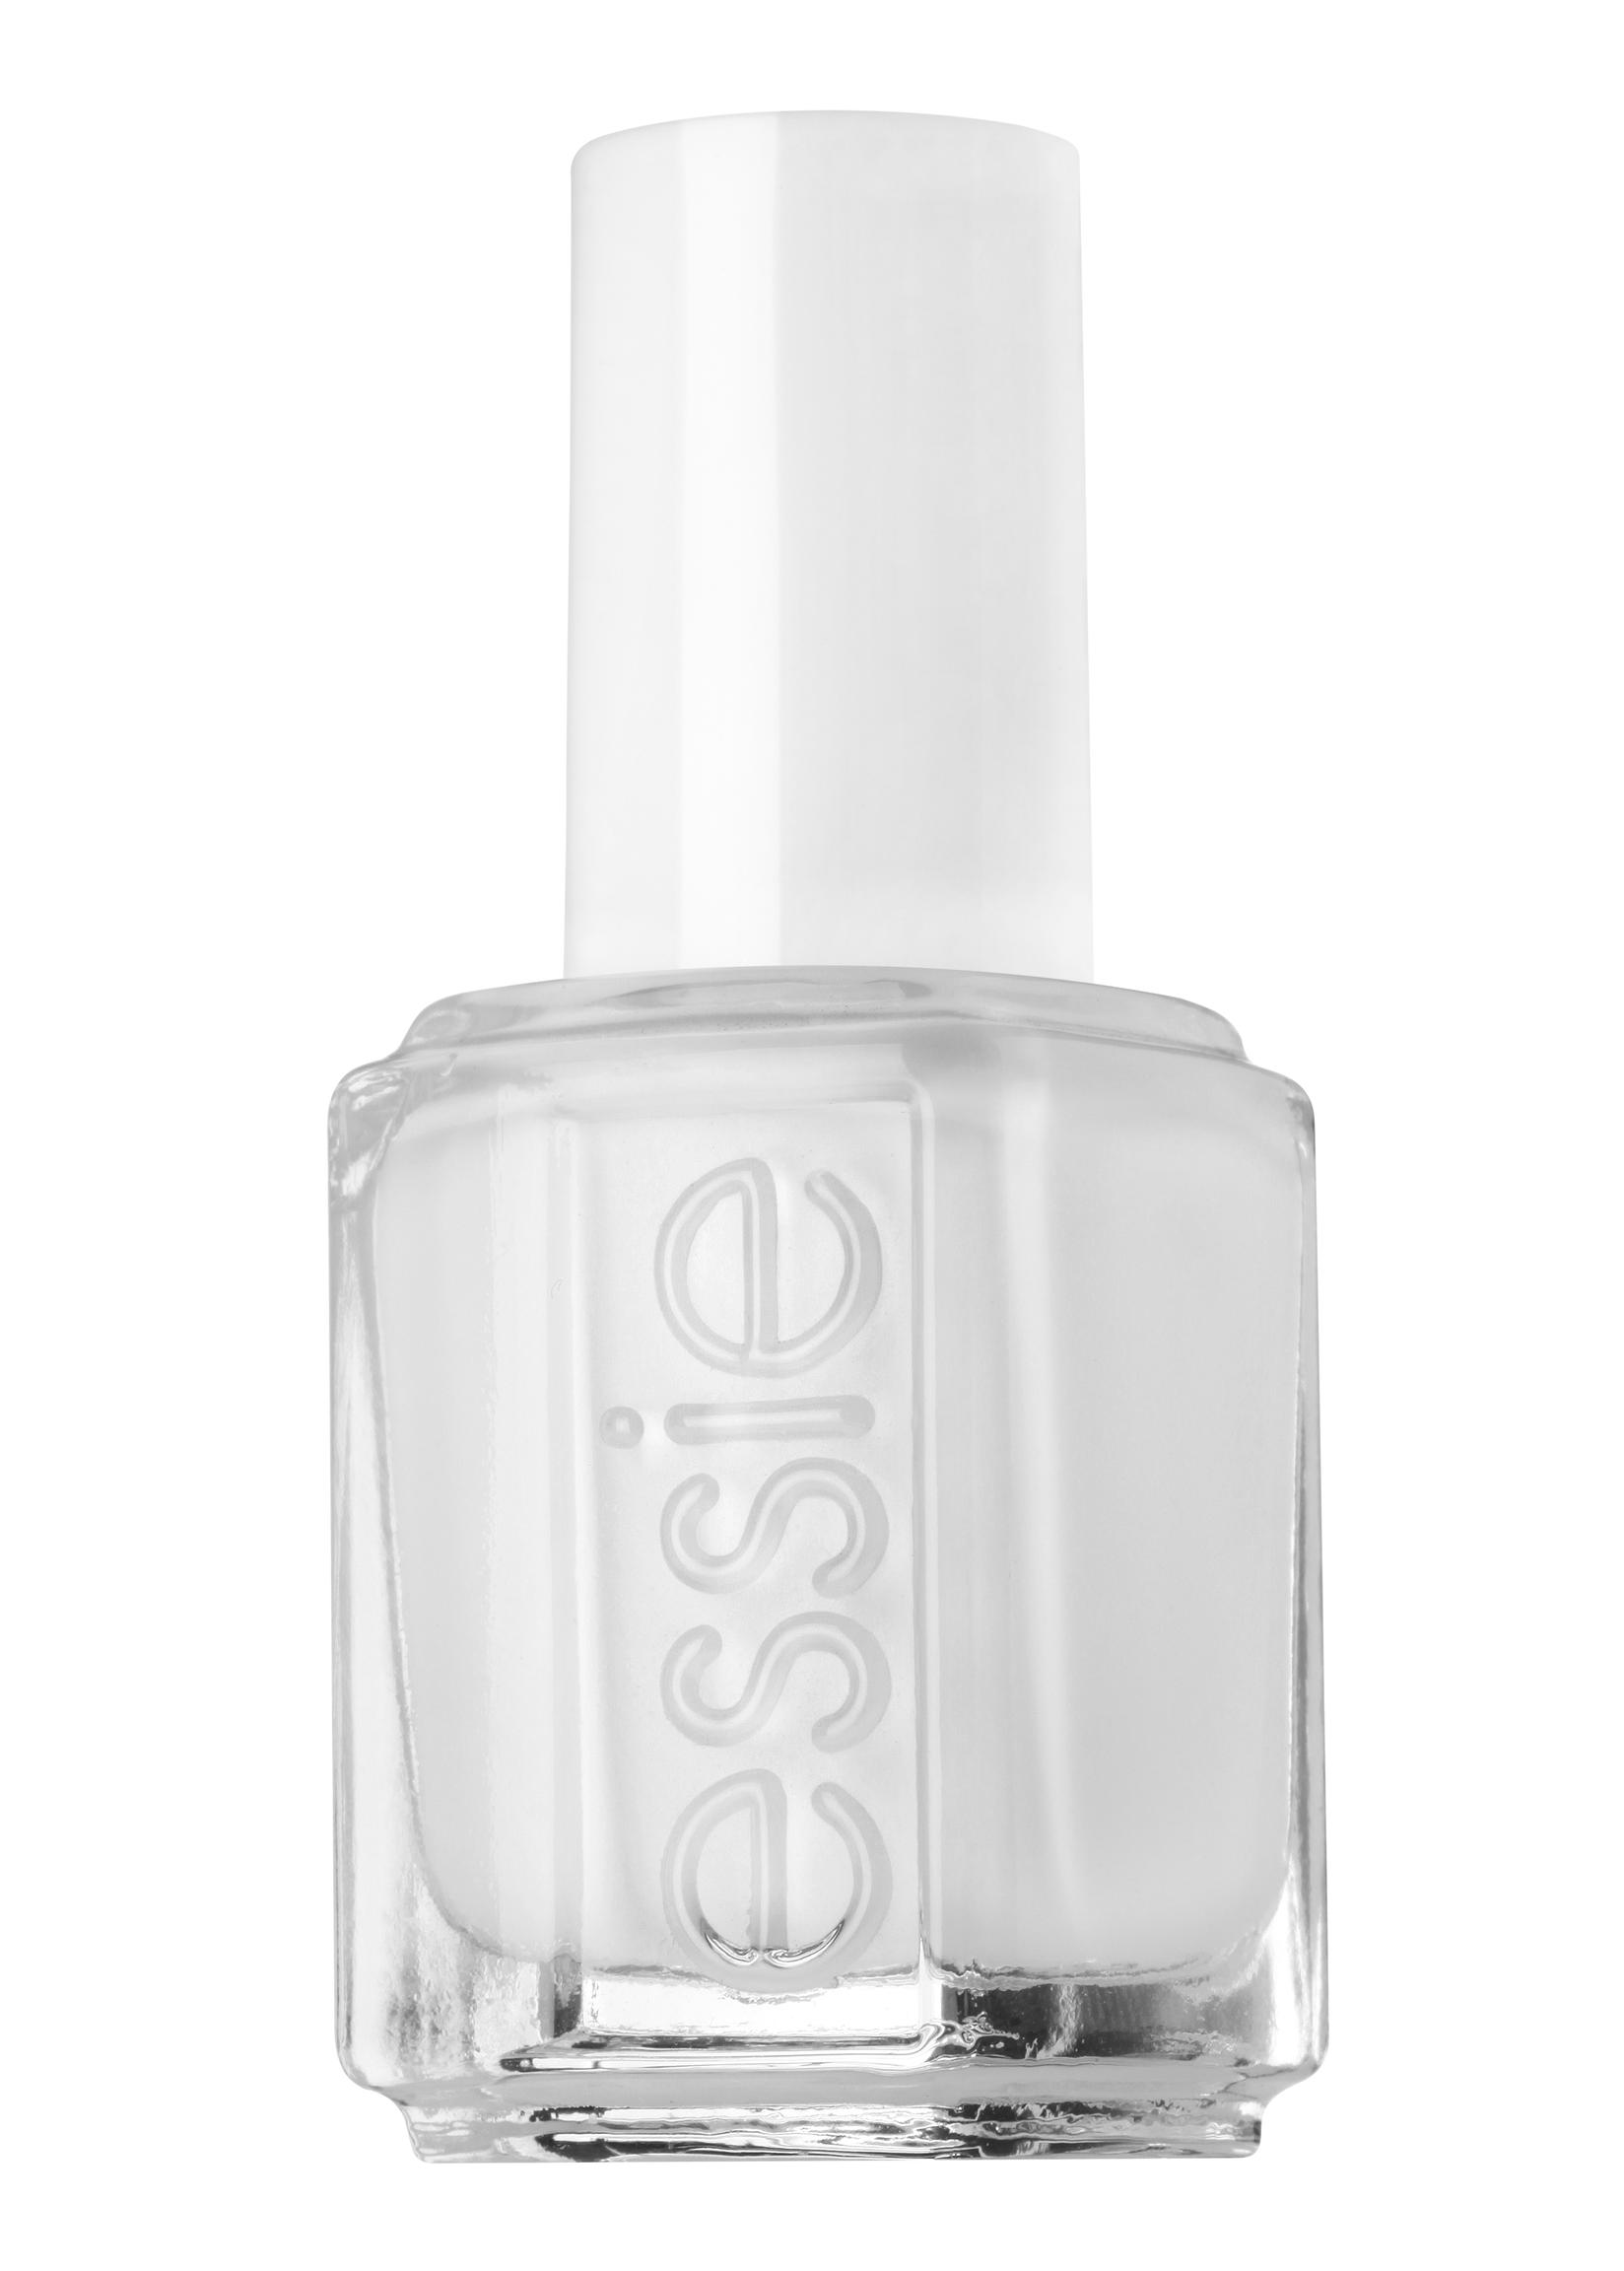 Selected image for ESSIE Lak za nokte 1 Blanc